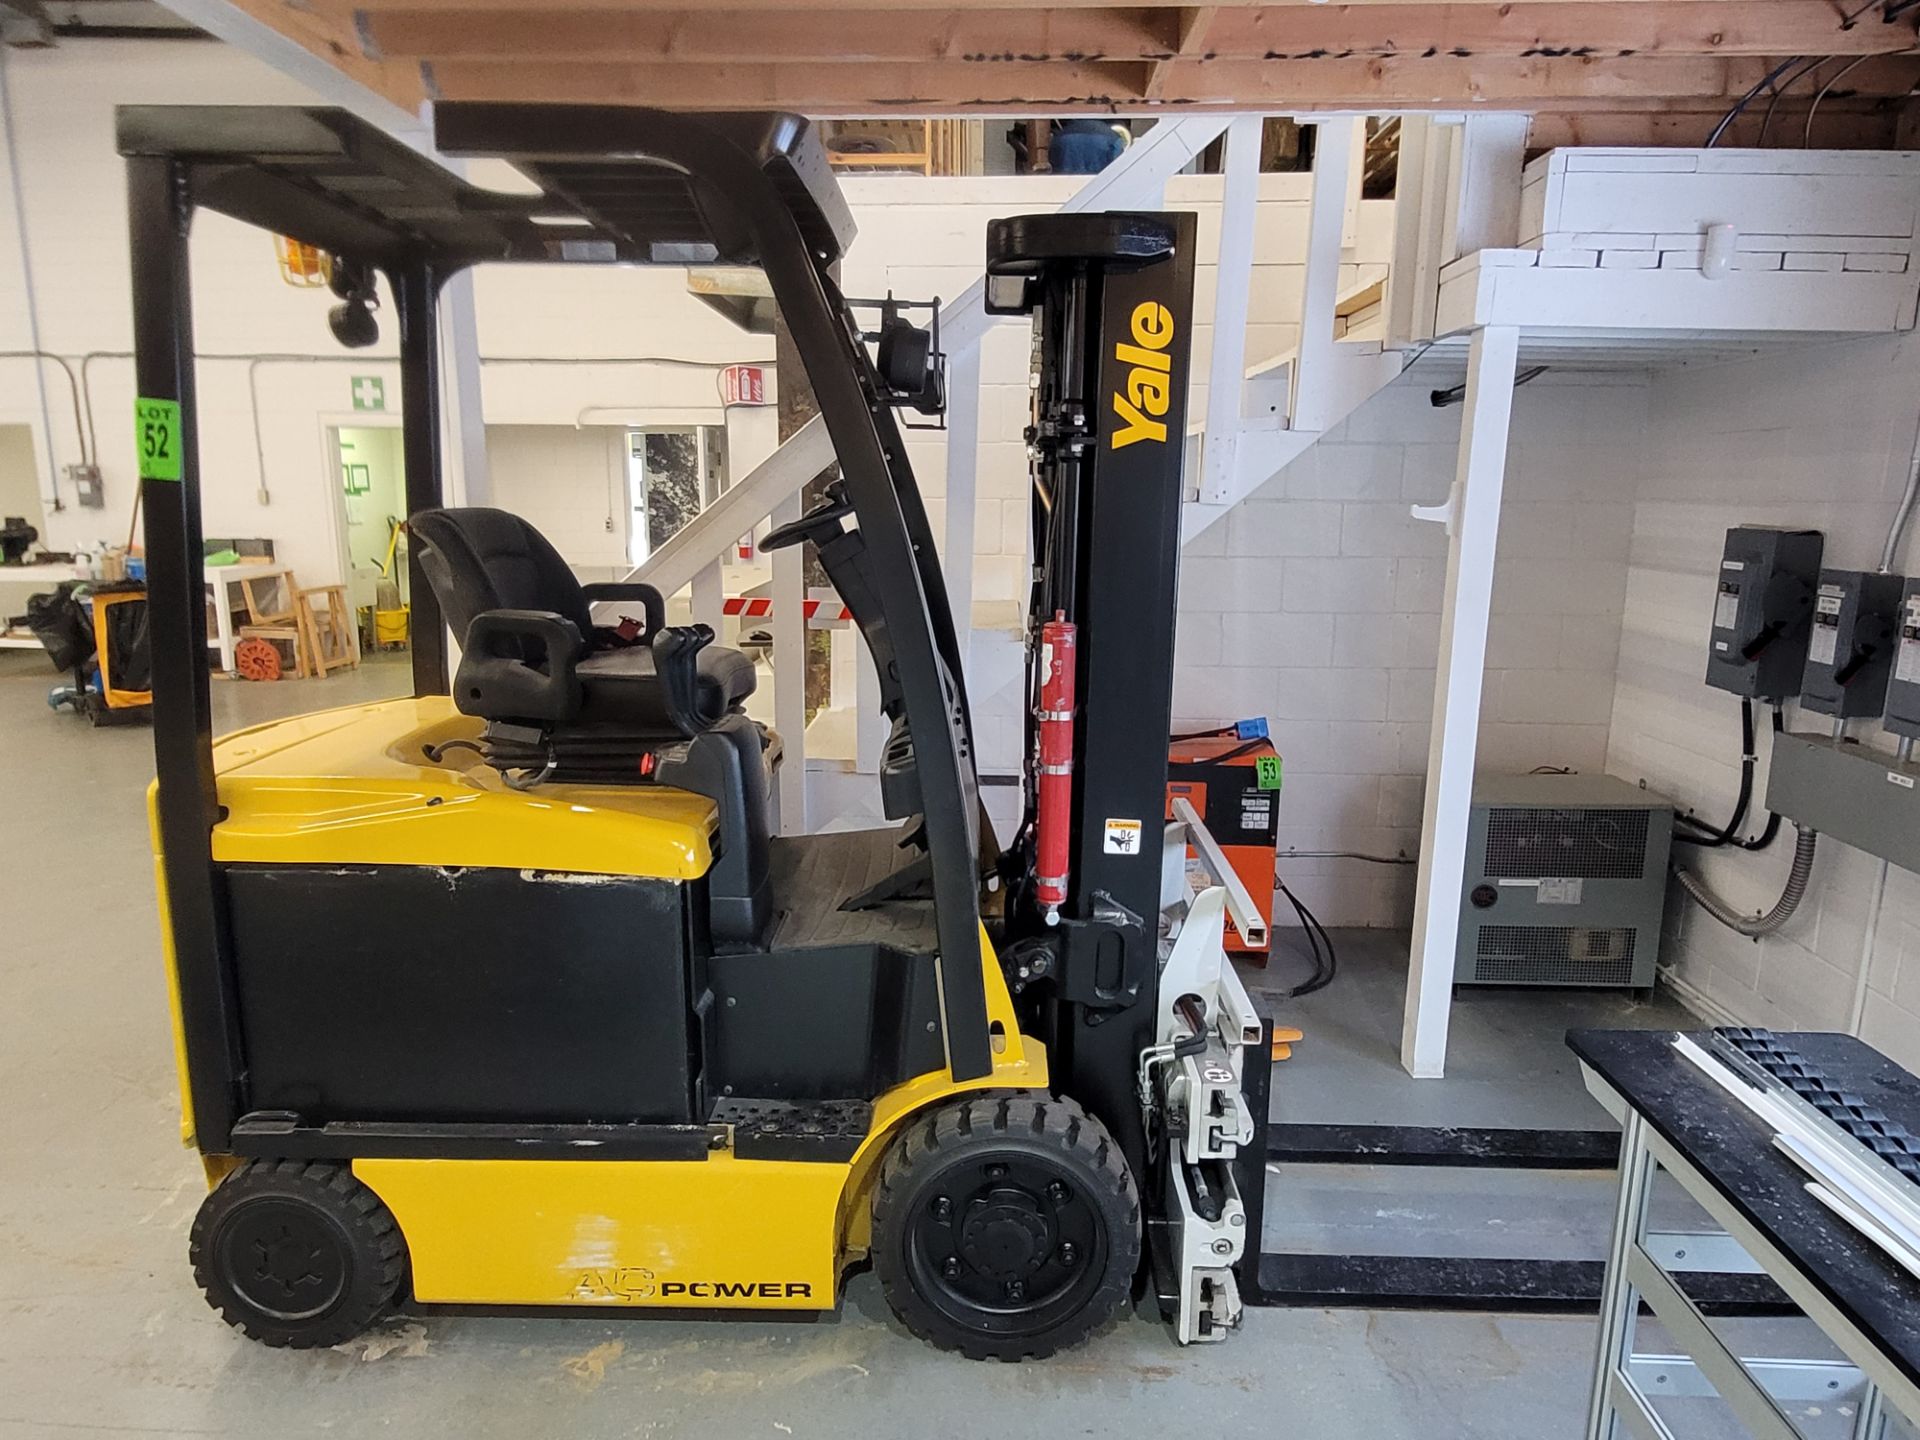 YALE Forklift mod. ERCO050VGN48TE85, 4200lbs cap., 48V, 17' H, 4900hrs, ser. A968N04749 with battery